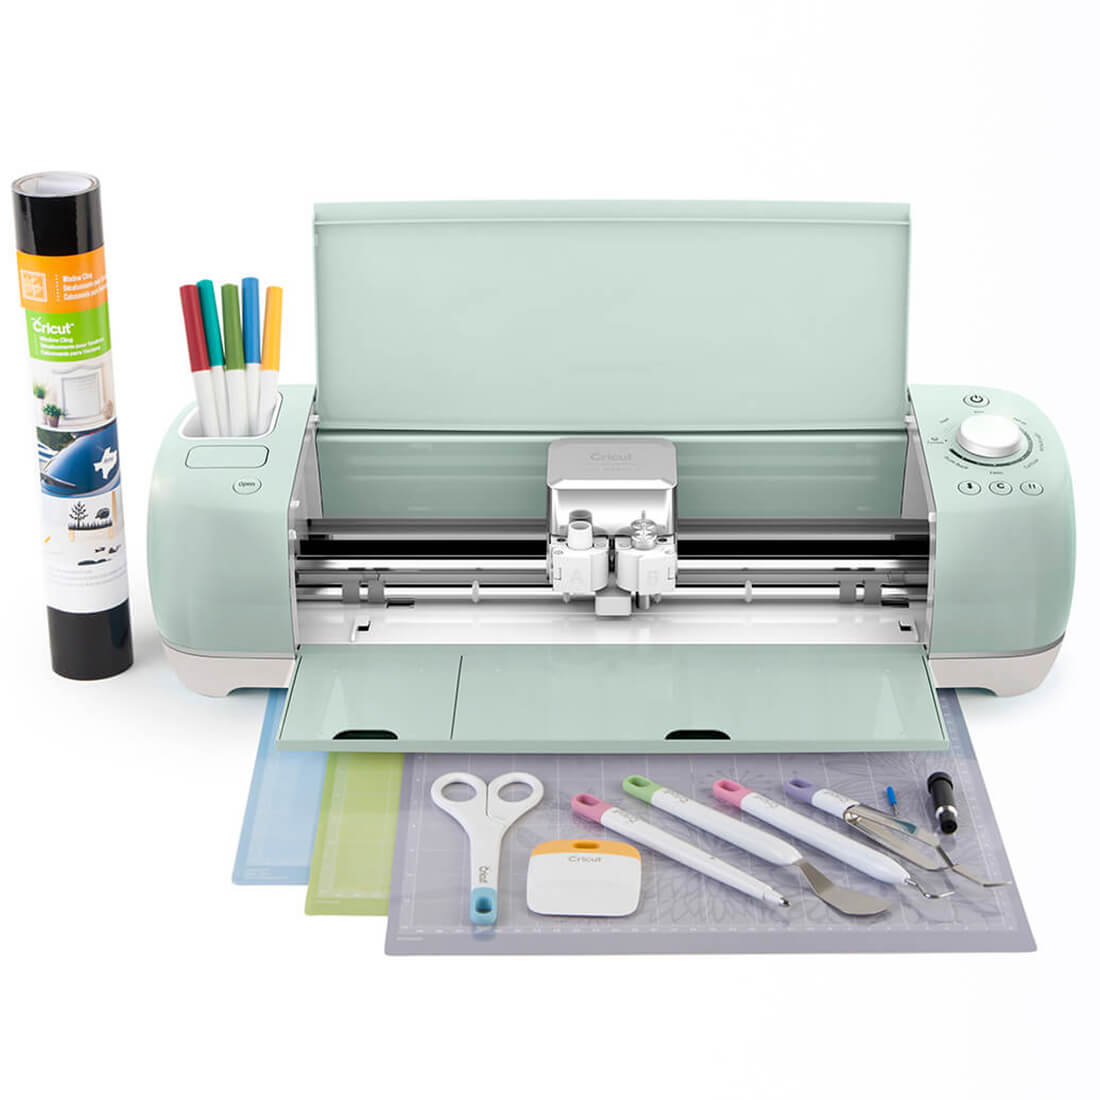 5 Little Monsters Cricut 101 Frequently Asked Questions And A Giveaway